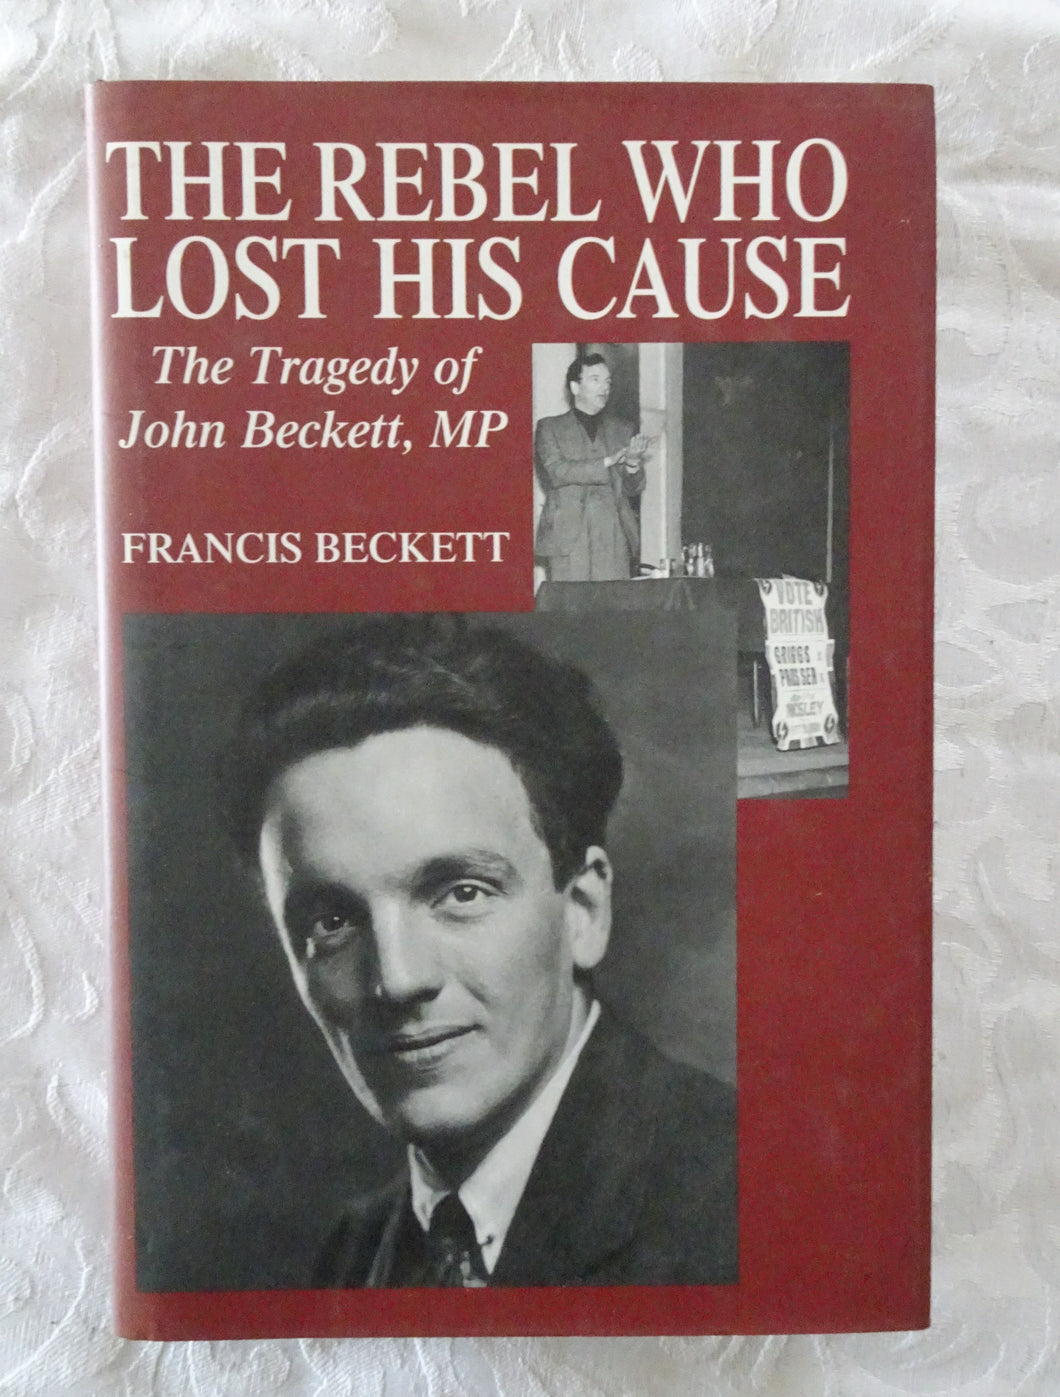 The Rebel Who Lost His Cause  The Tragedy of John Beckett, MP  by Francis Beckett